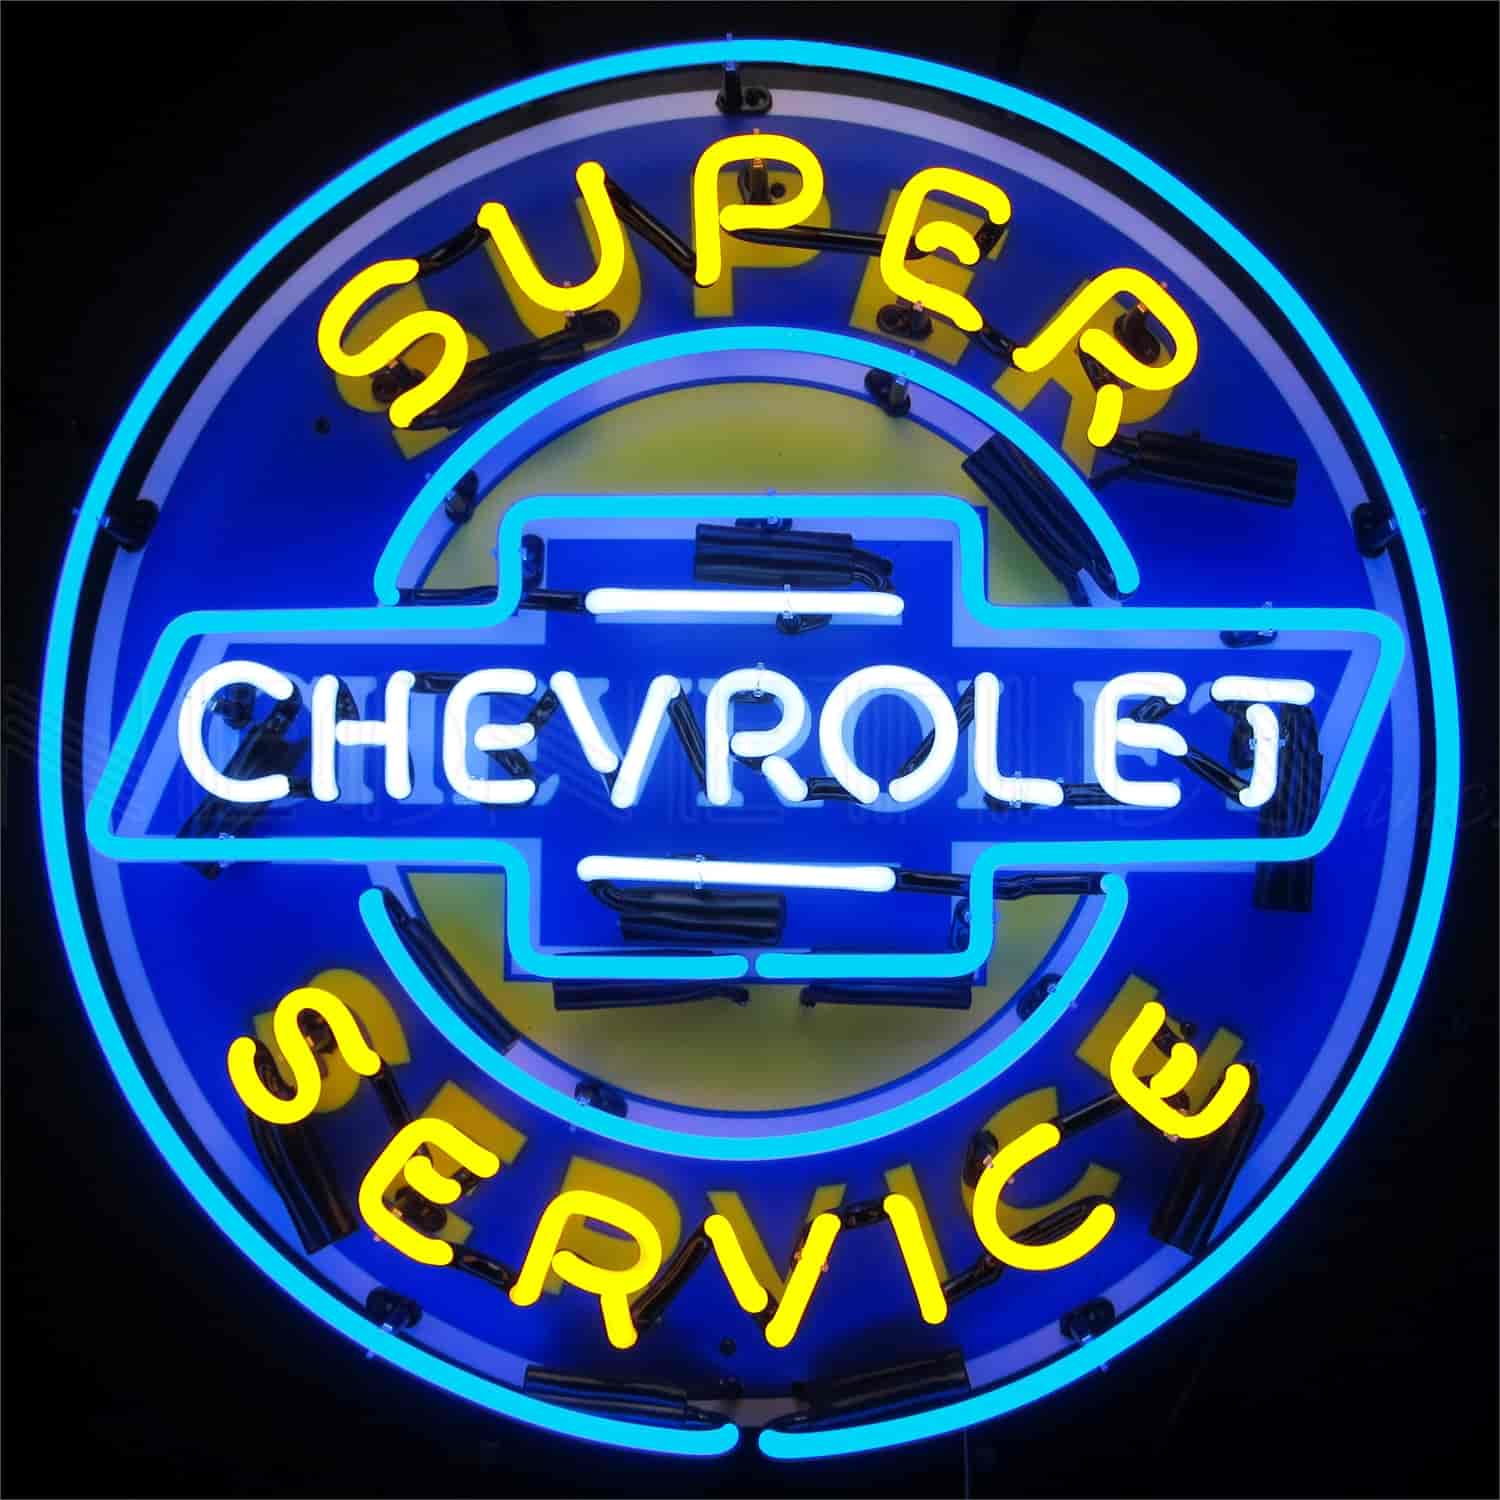 Super Chevrolet Service With Backing Neon Sign